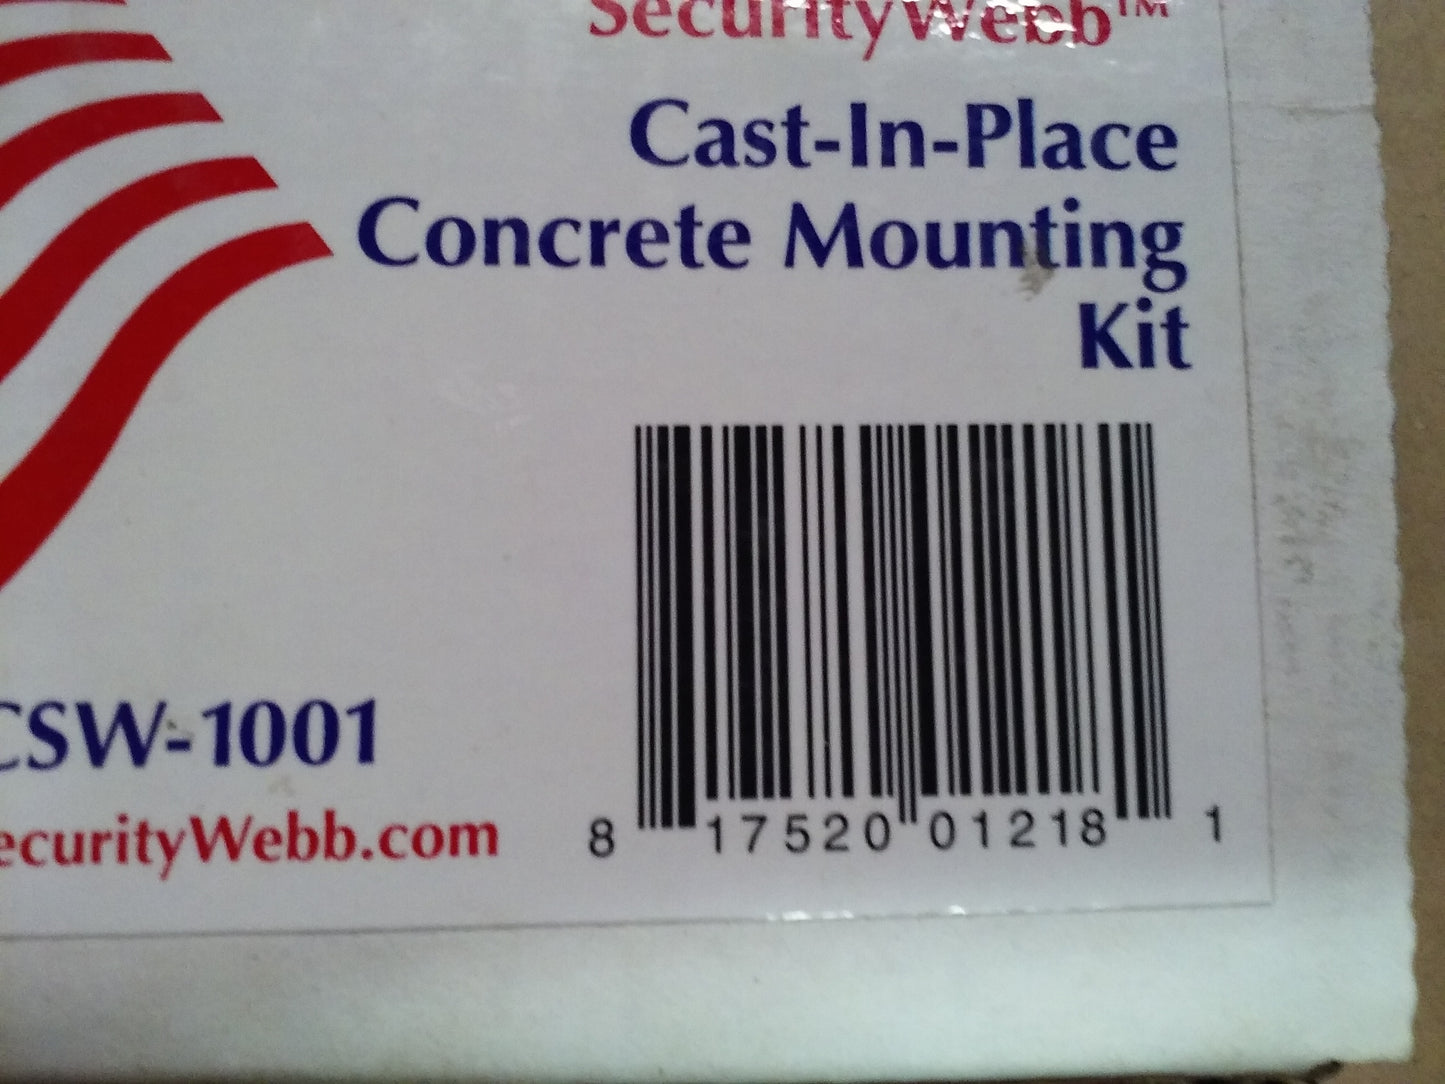 CAST-IN-PLACE CONCRETE MOUNTING KIT